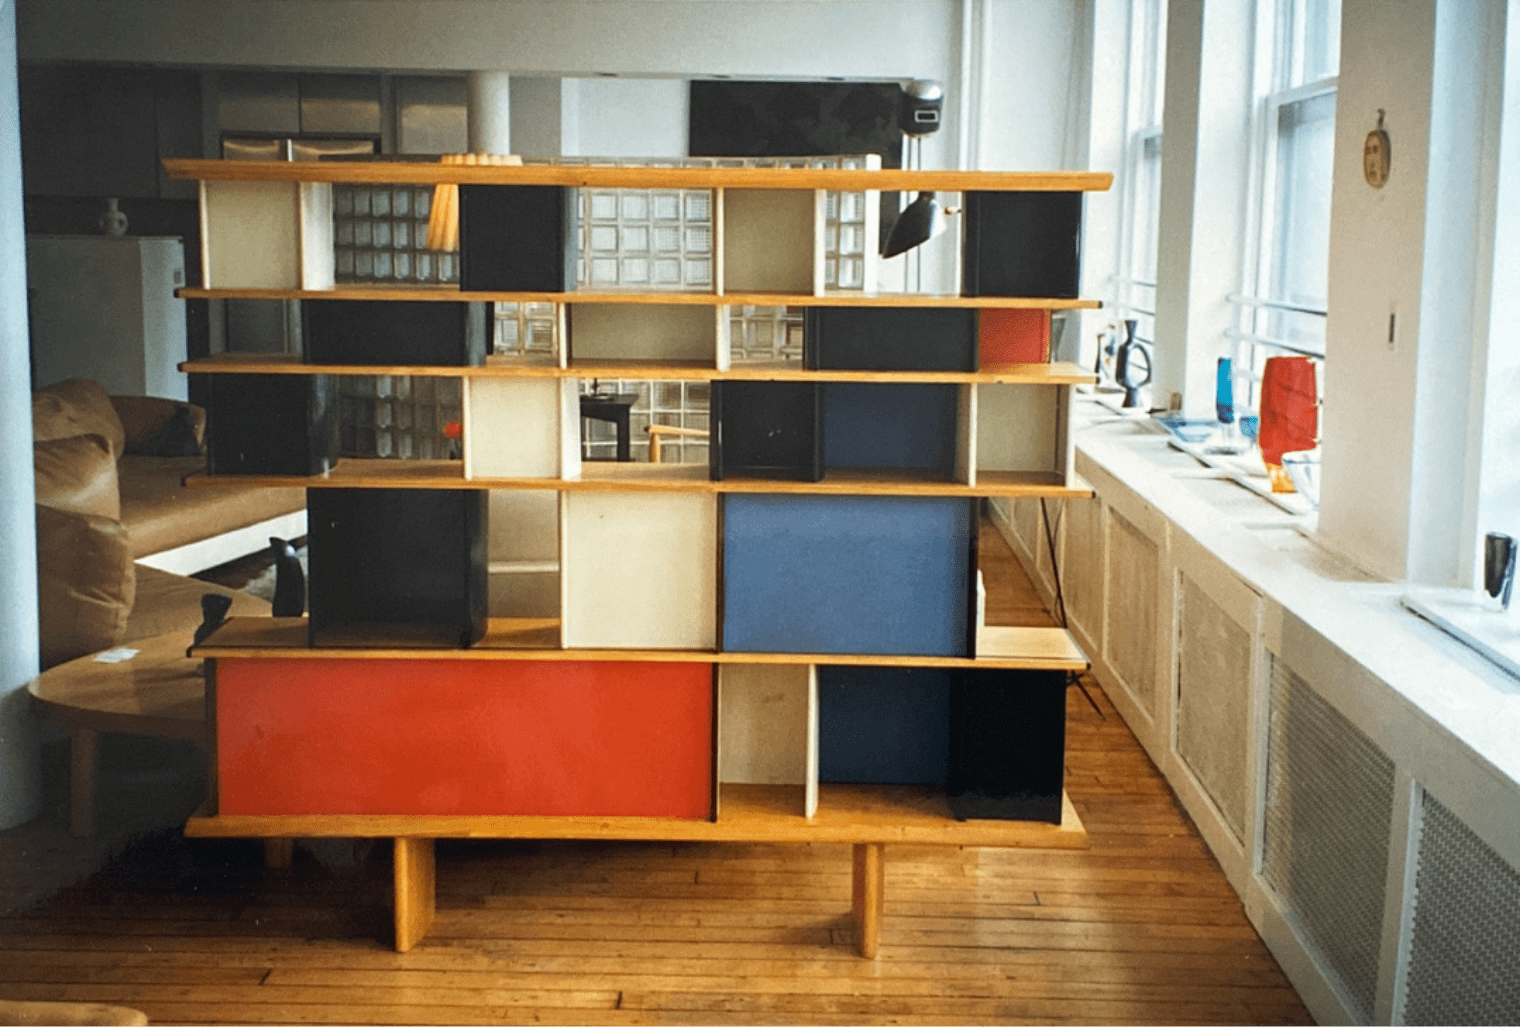 Galerie de Beyrie, New York, 1999 : Charlotte Perriand, Georges Jouve